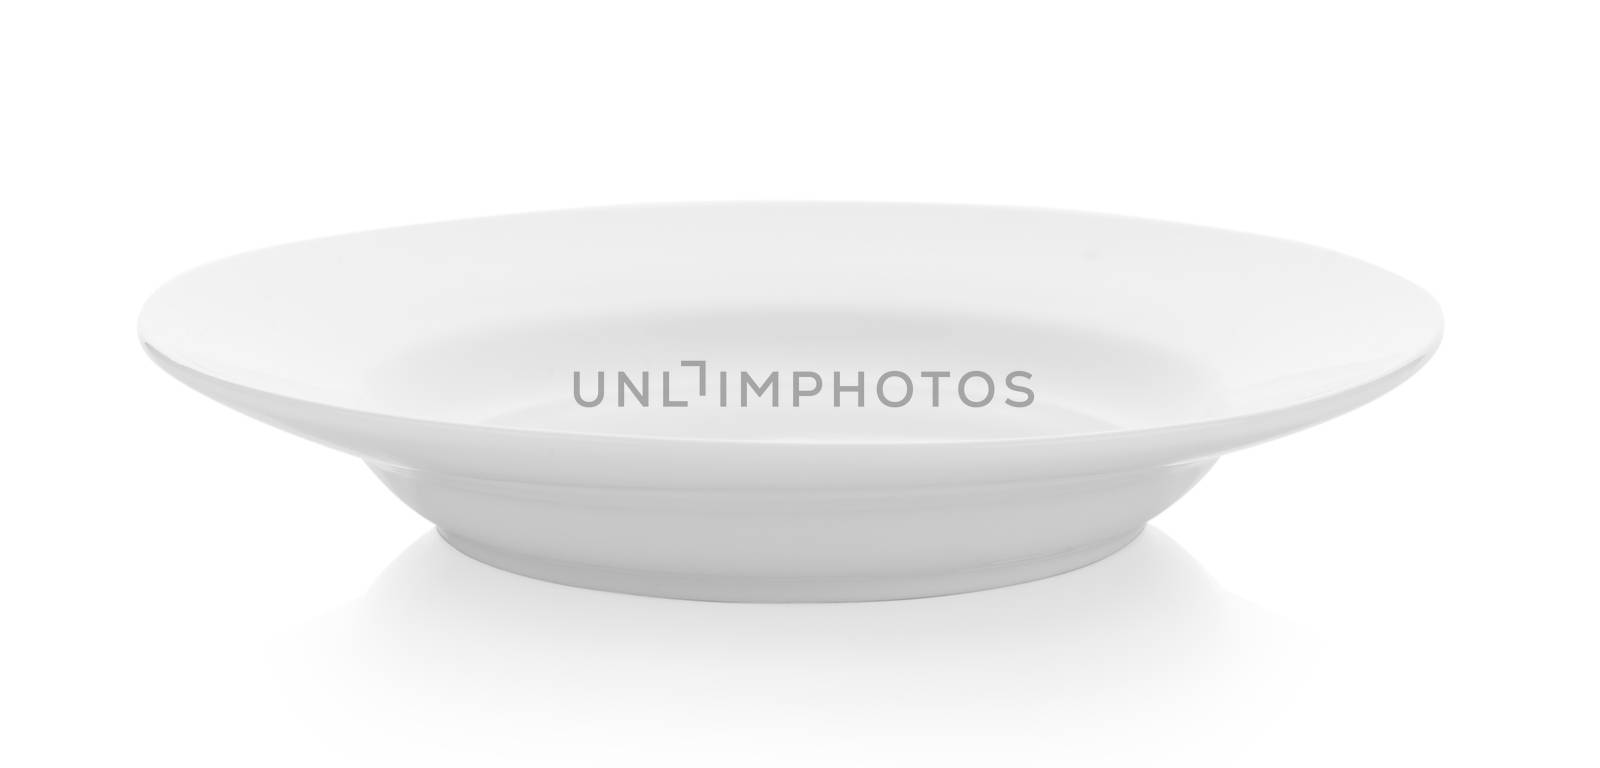 white ceramic plate isolated on white background by sommai